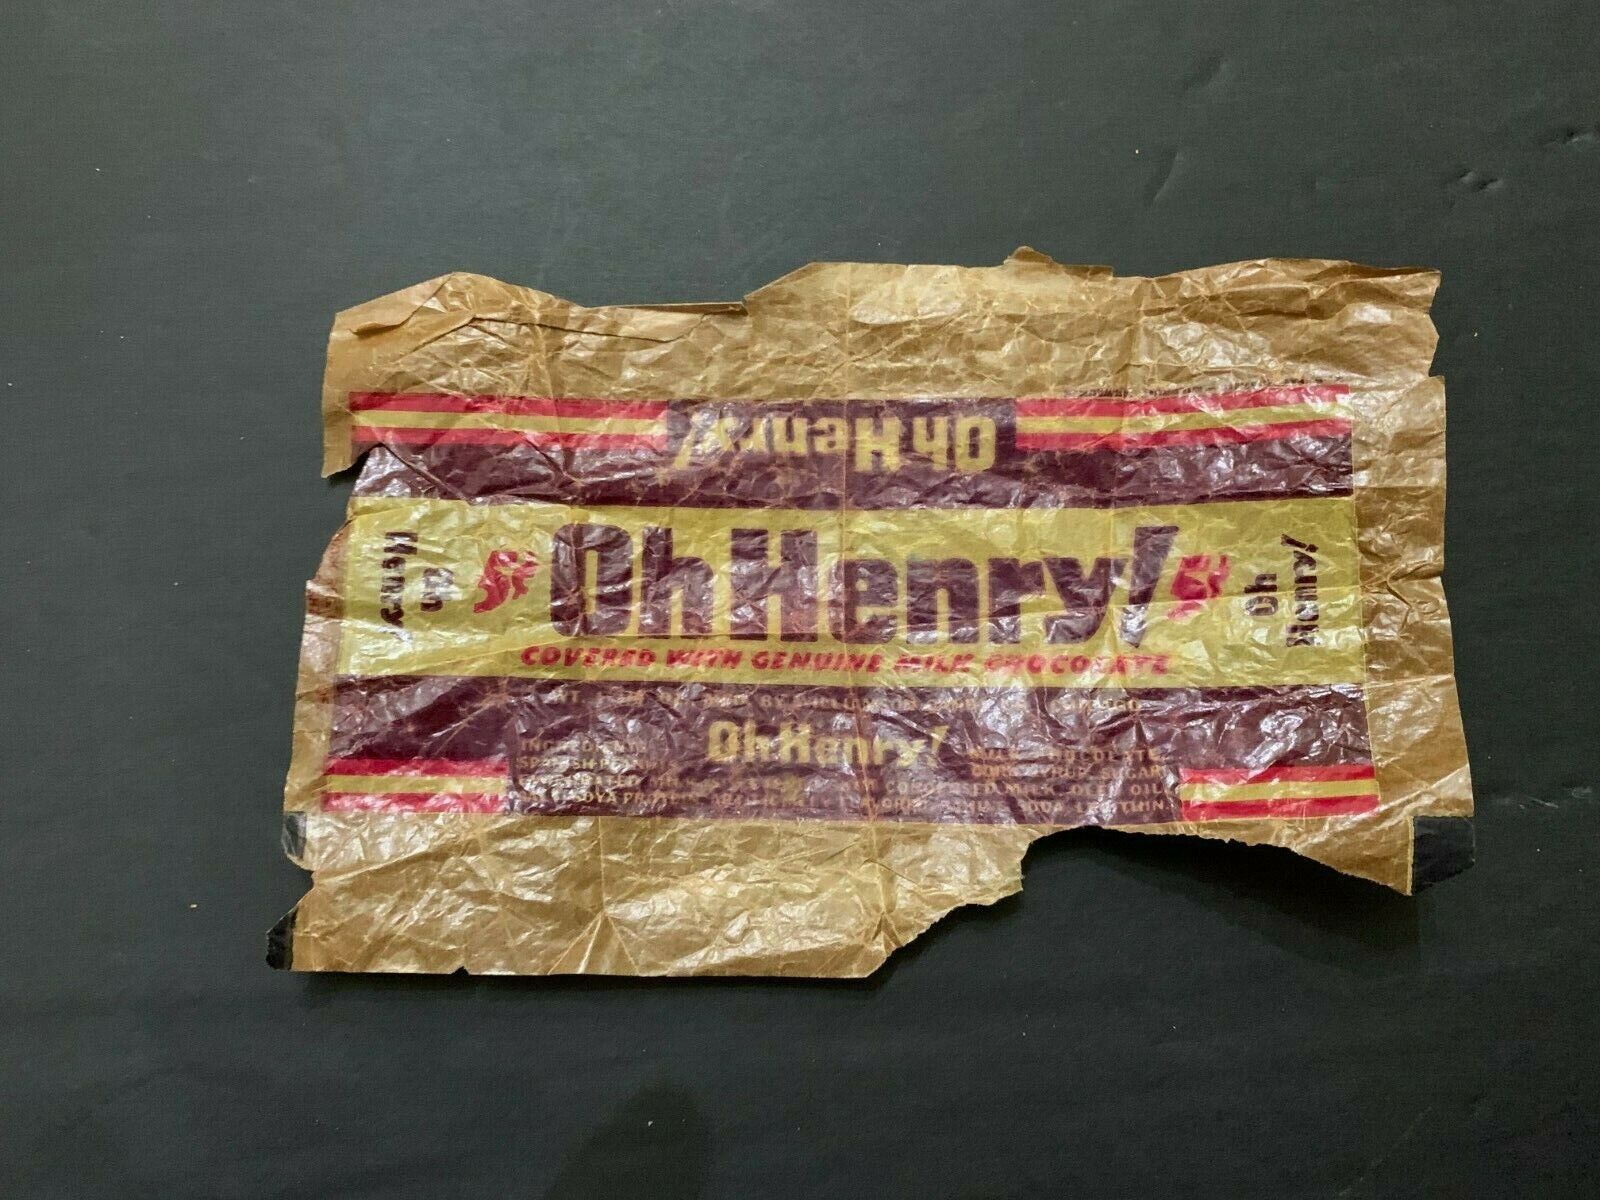 Vintage 1945 Oh Henry 5 cent Wax Candy Bar Wrapper